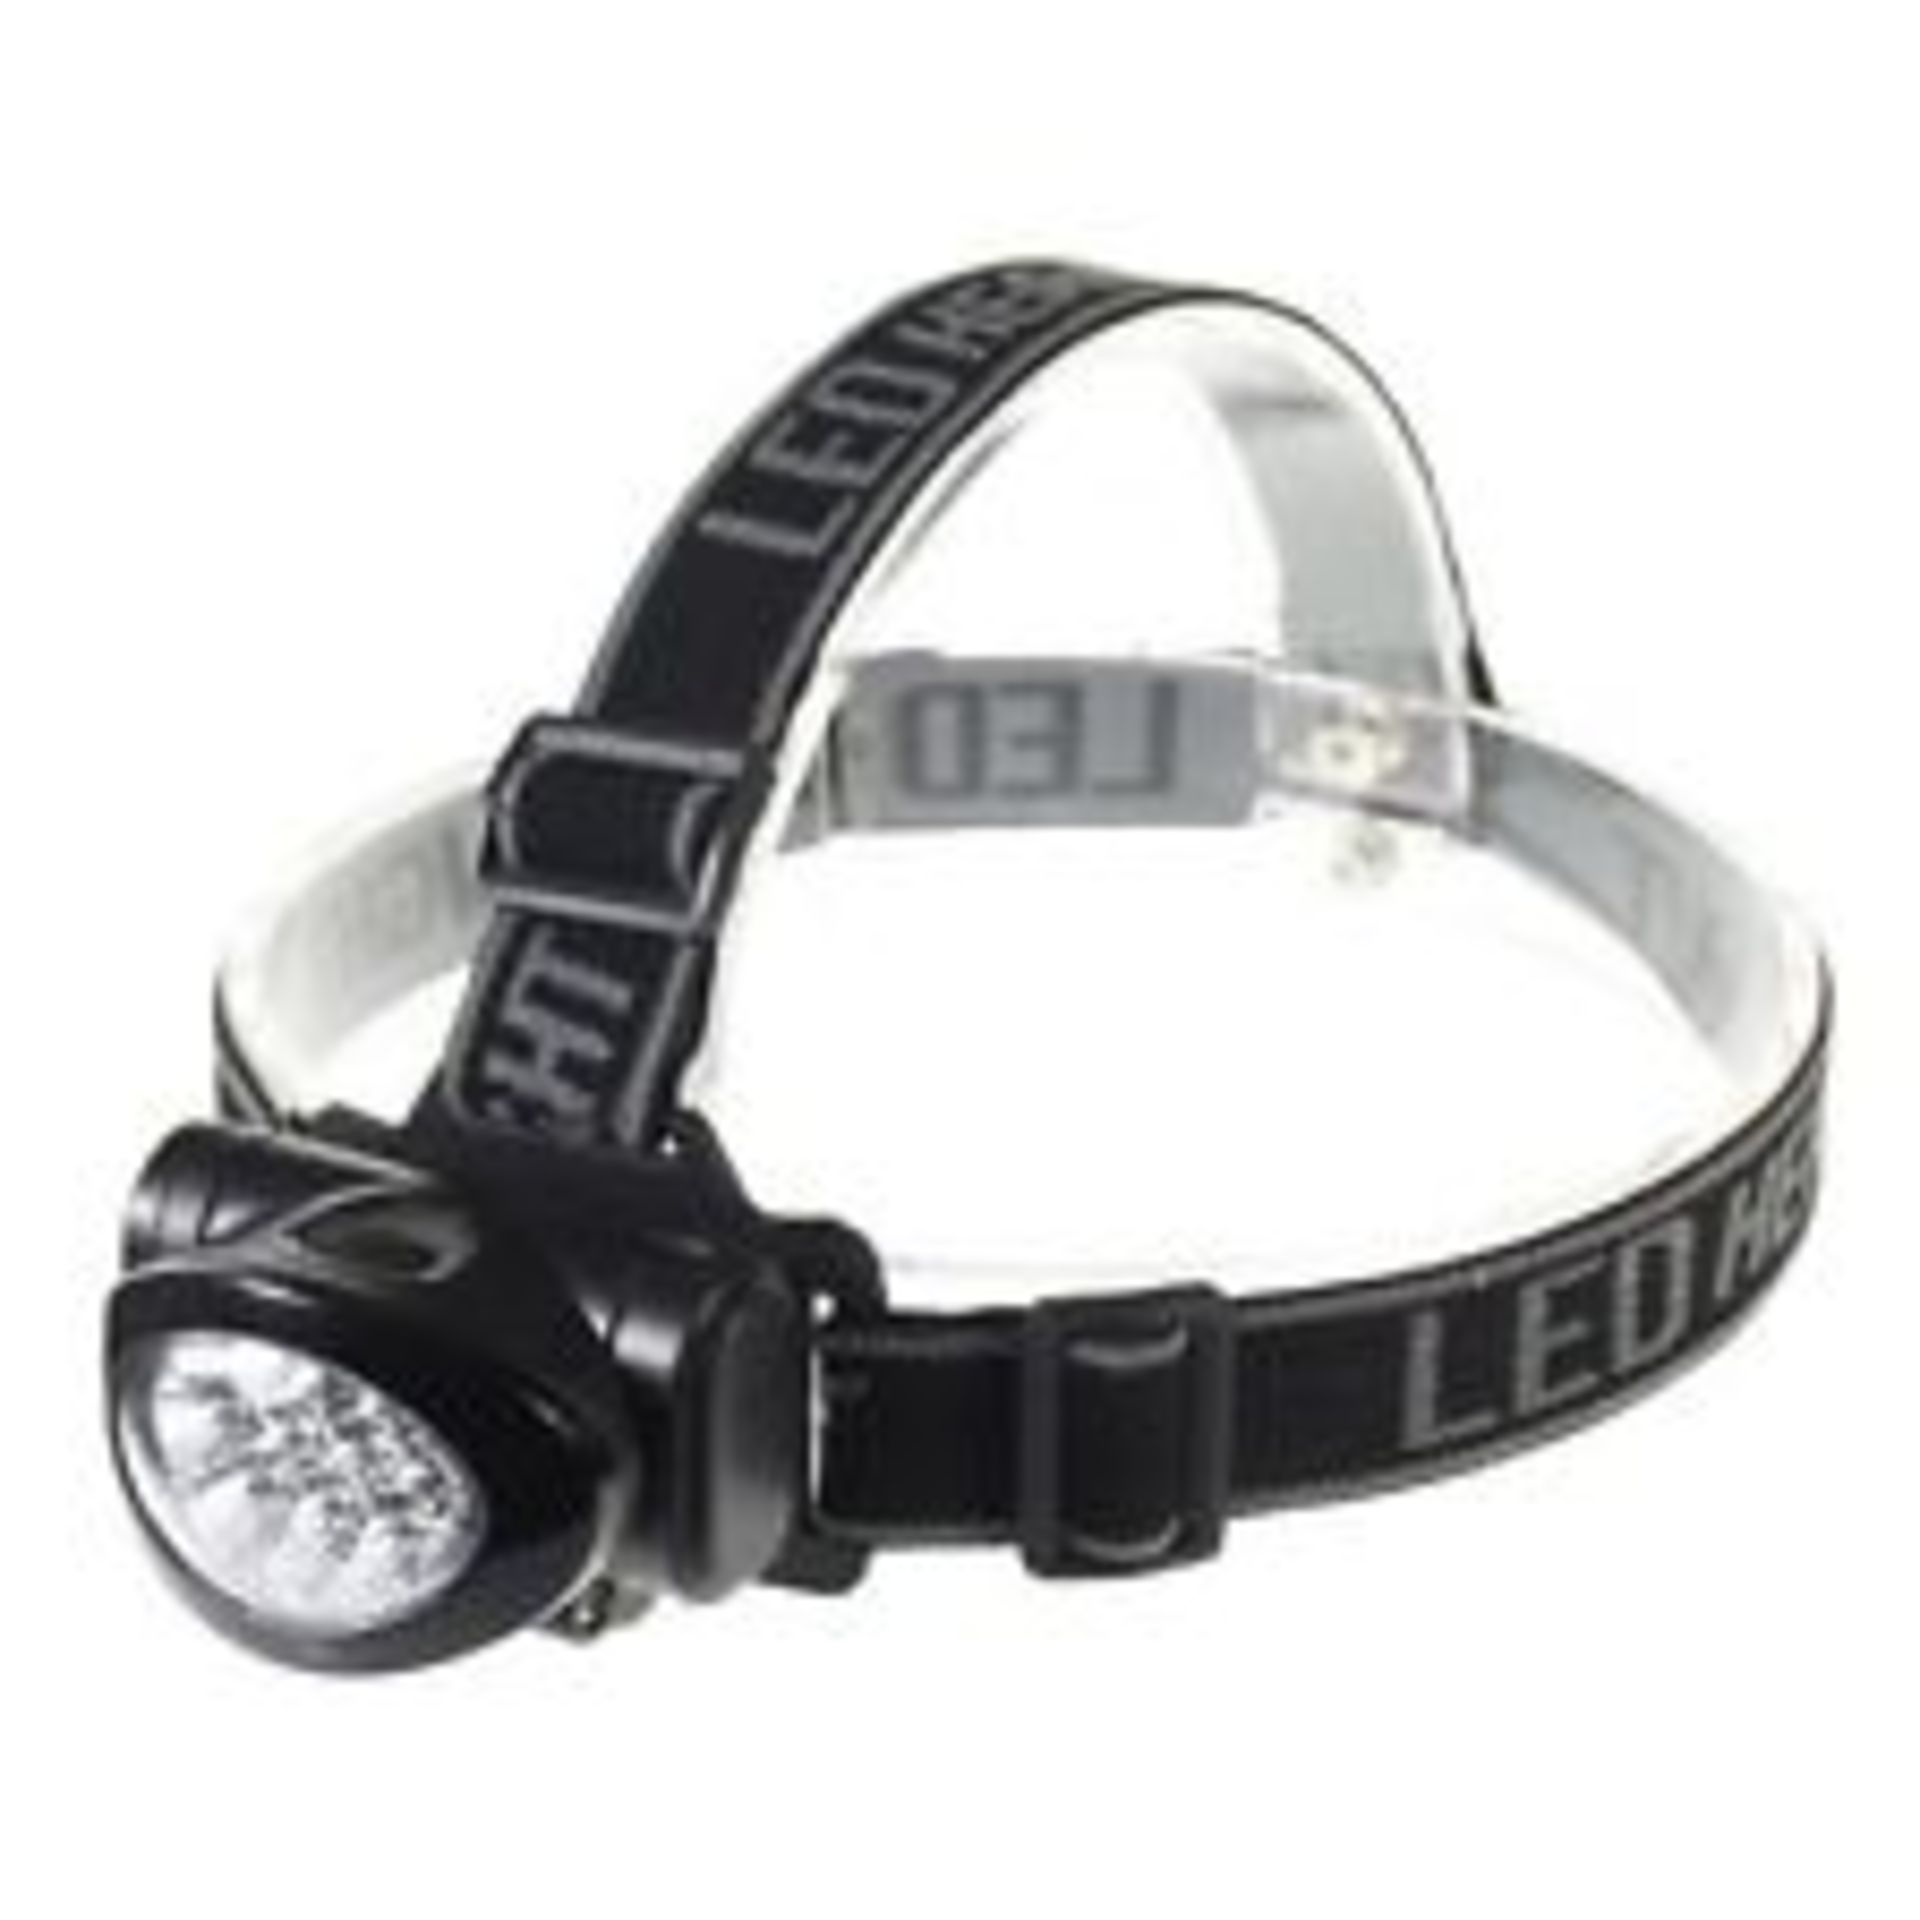 V *TRADE QTY* Brand New Water Resistant-Adjustable Strap/Lamp-Battery-LED Lamp Head Lamp (Item May